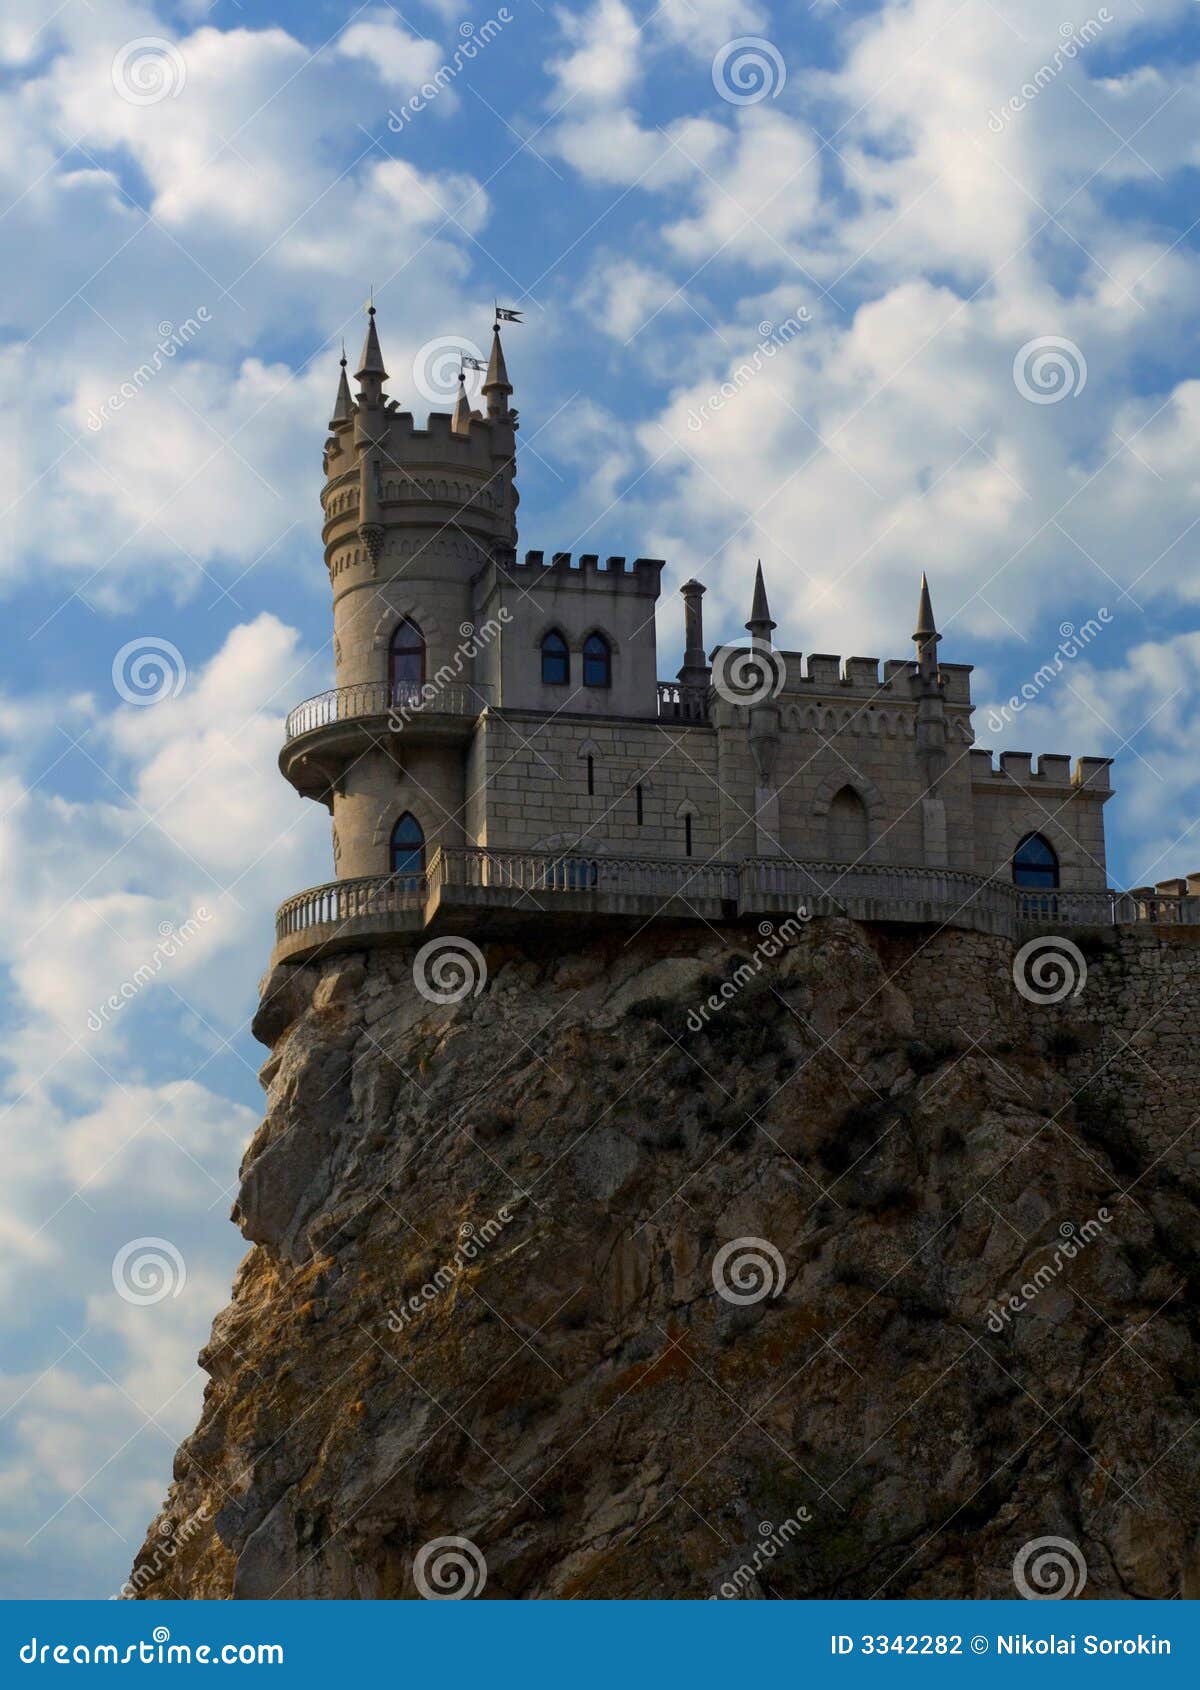 old castle on cliff